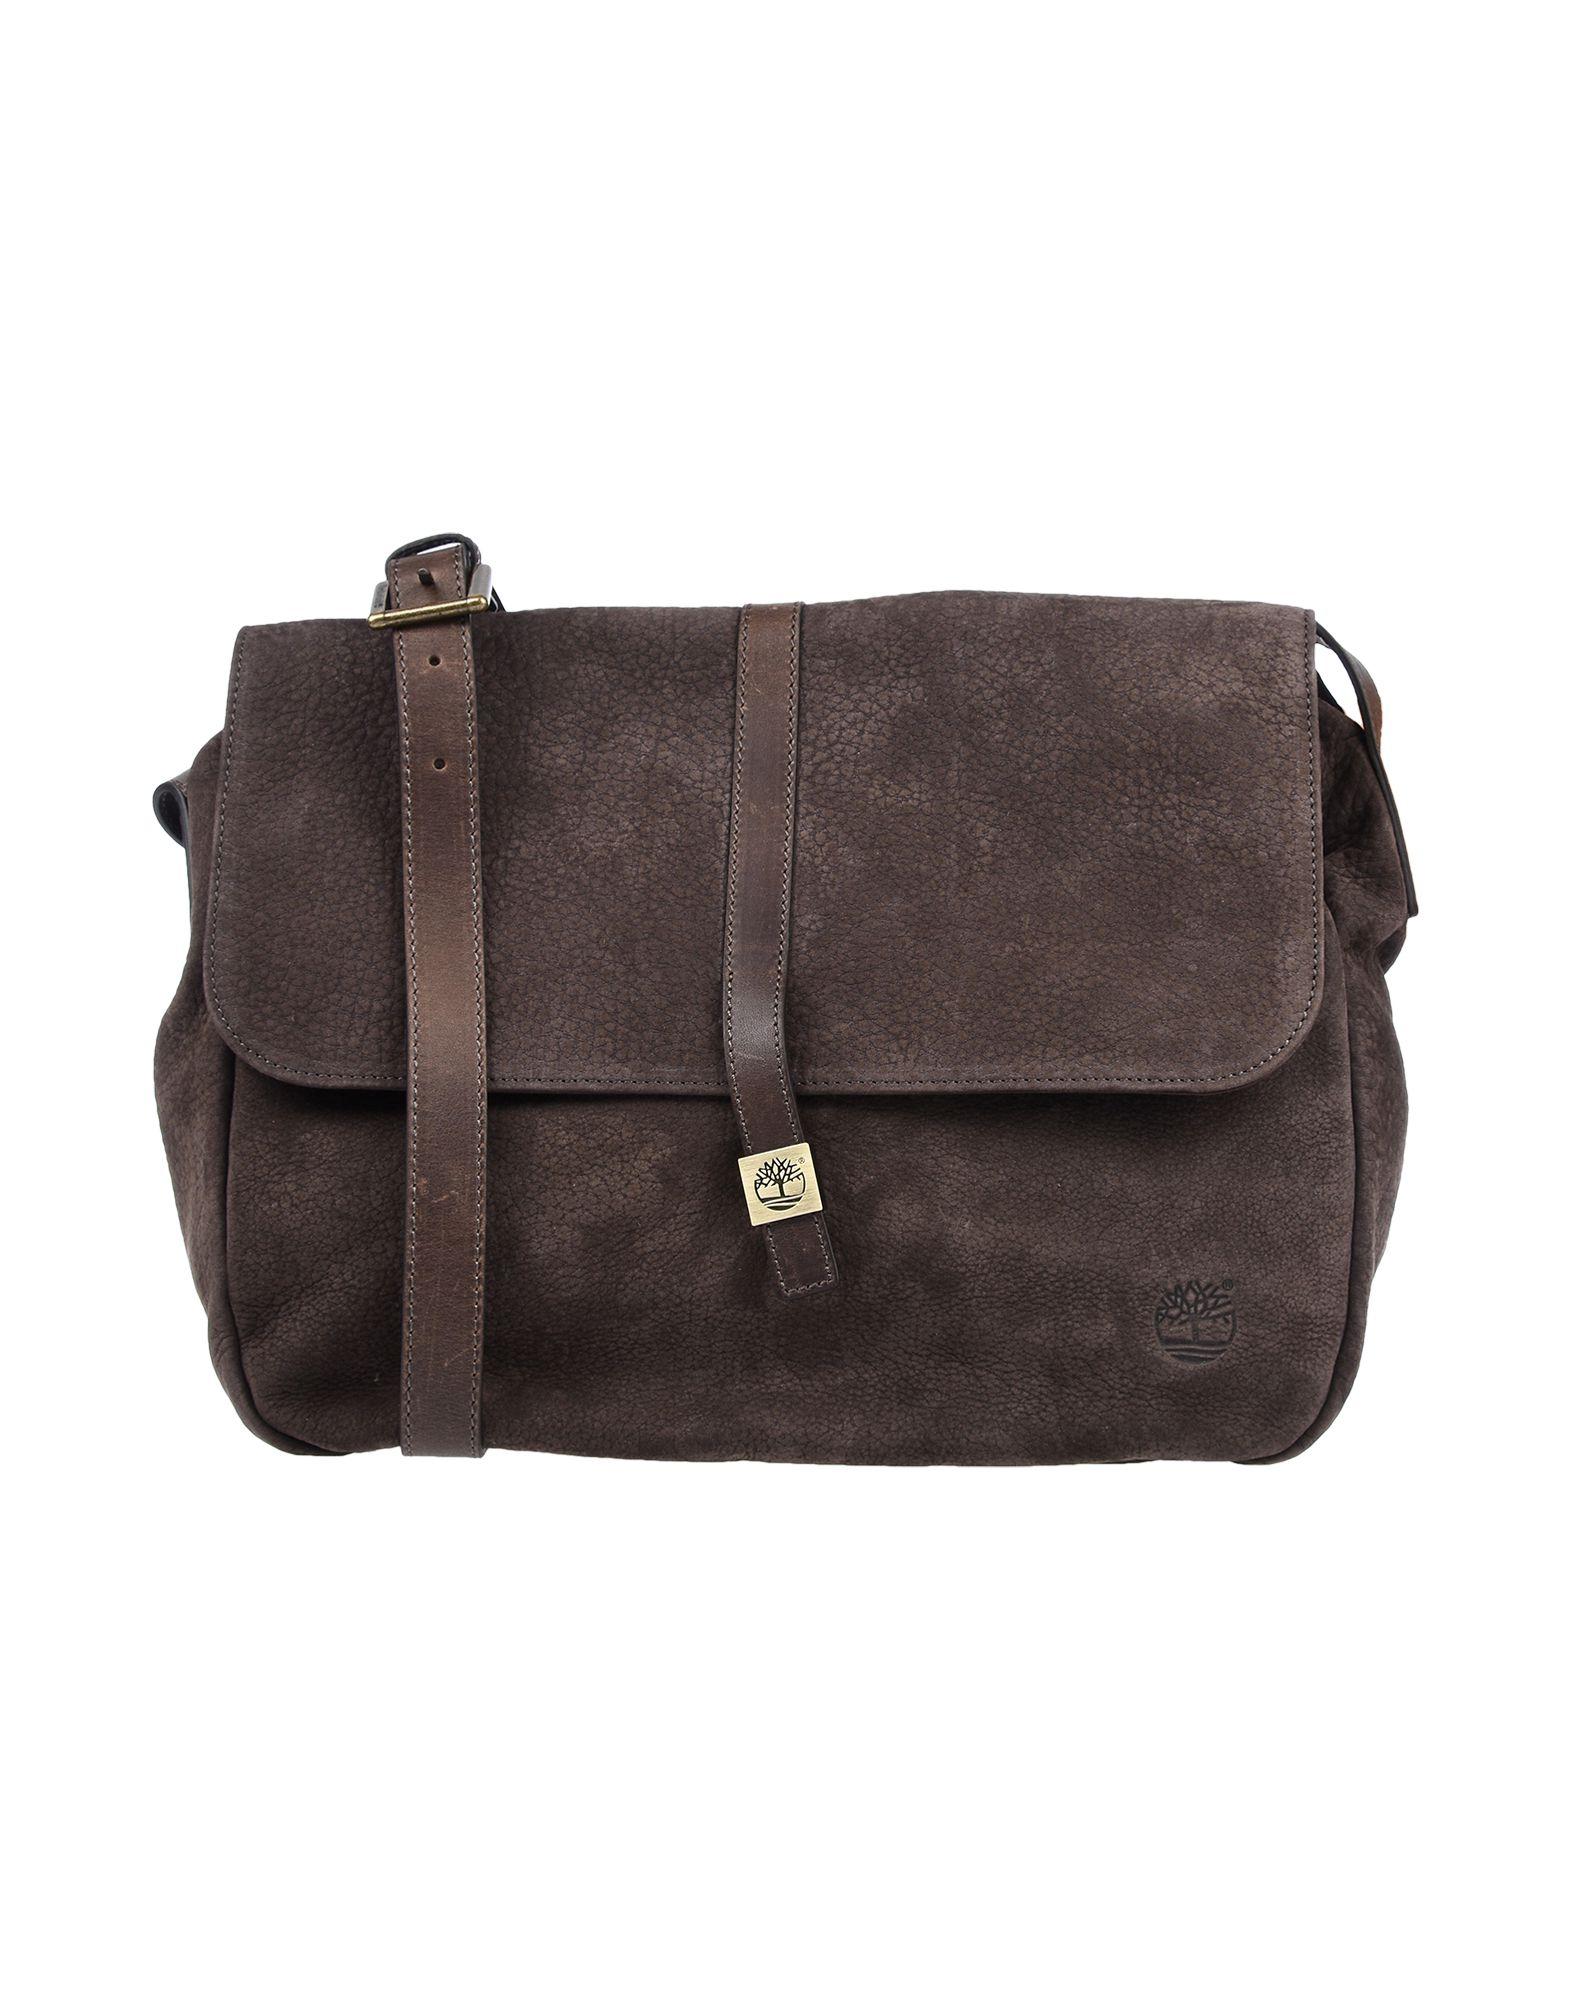 Timberland Leather Cross-body Bag in Cocoa (Brown) - Lyst